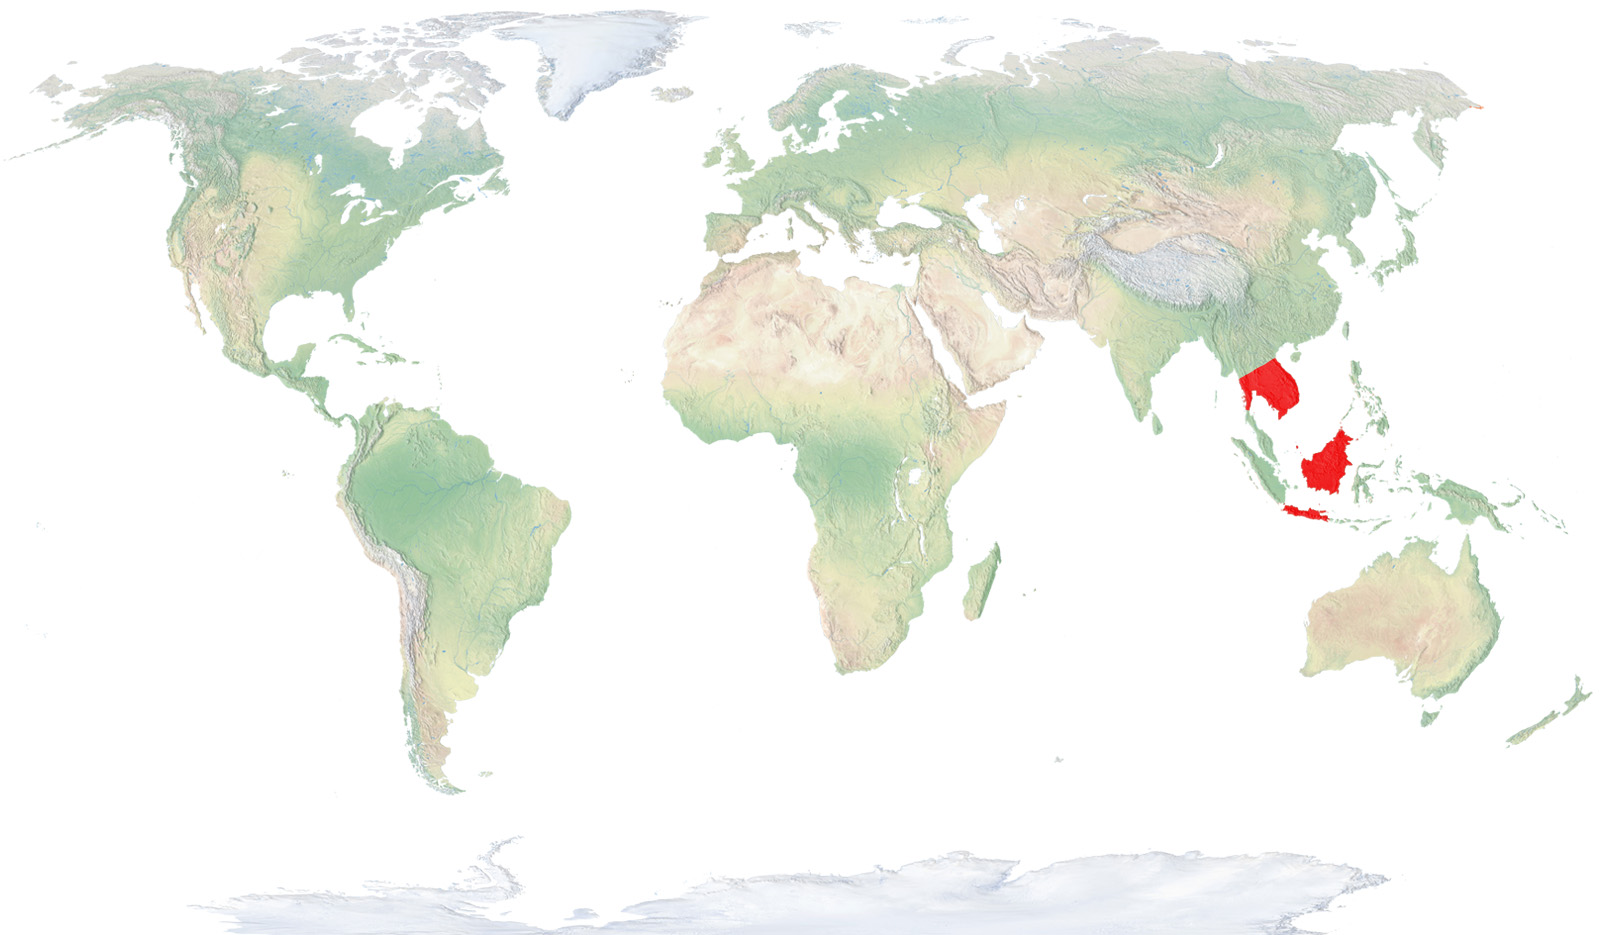 Thailand, Laos, Cambodia, Vietnam, Malaysia and certain Indonesian islands, such as Java and Borneo